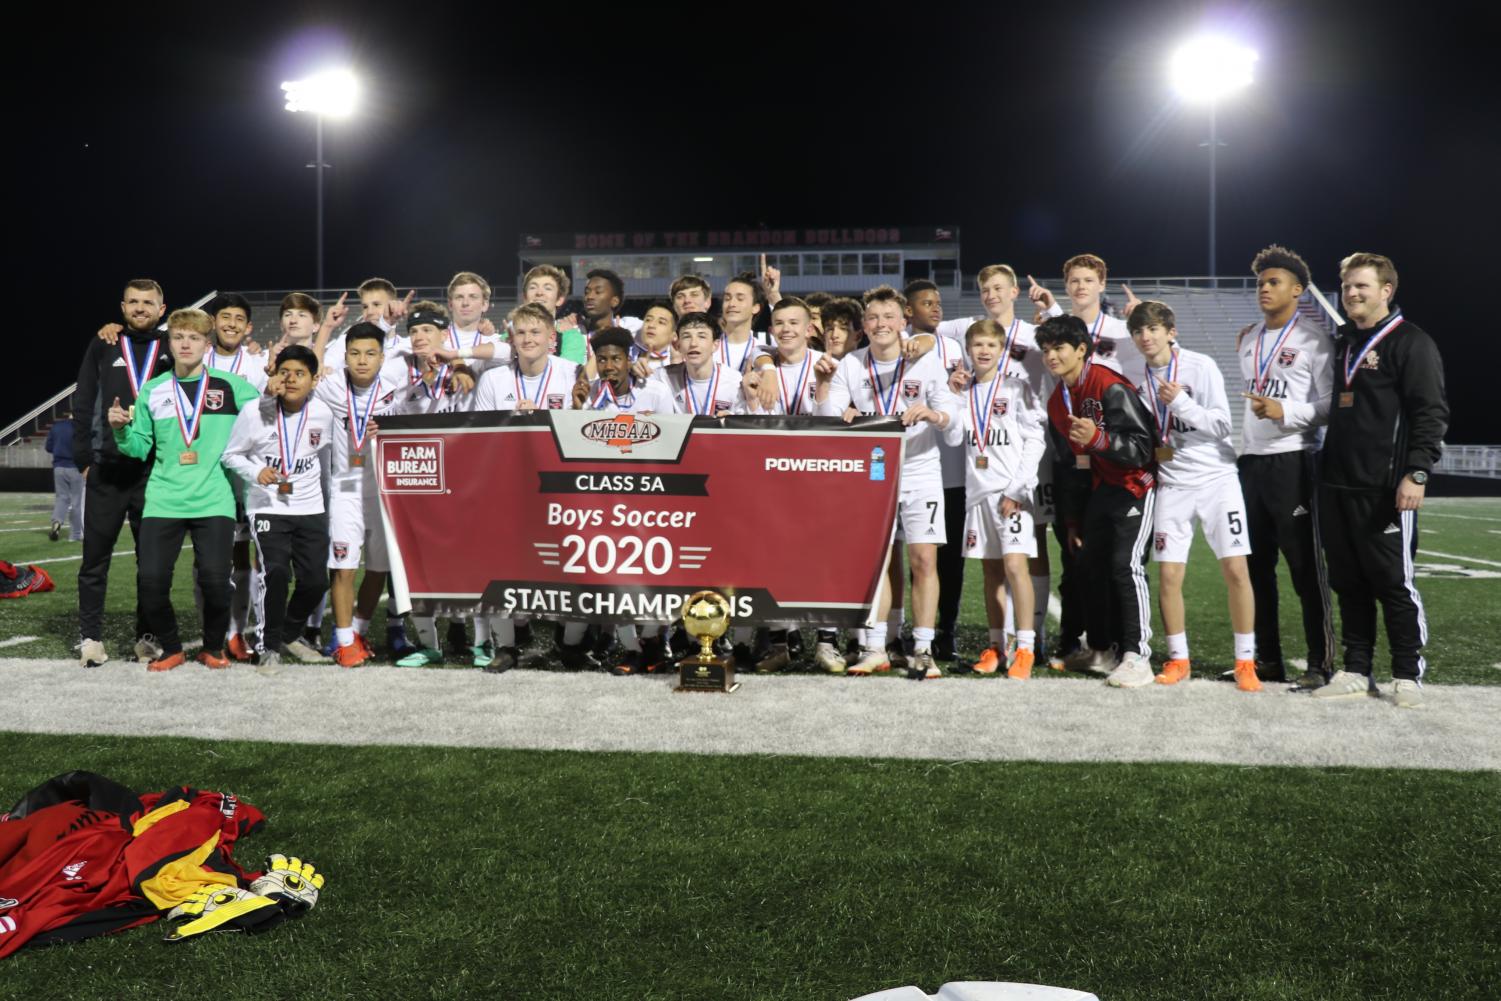 Boys+soccer+wins+first+state+title+in+school+history